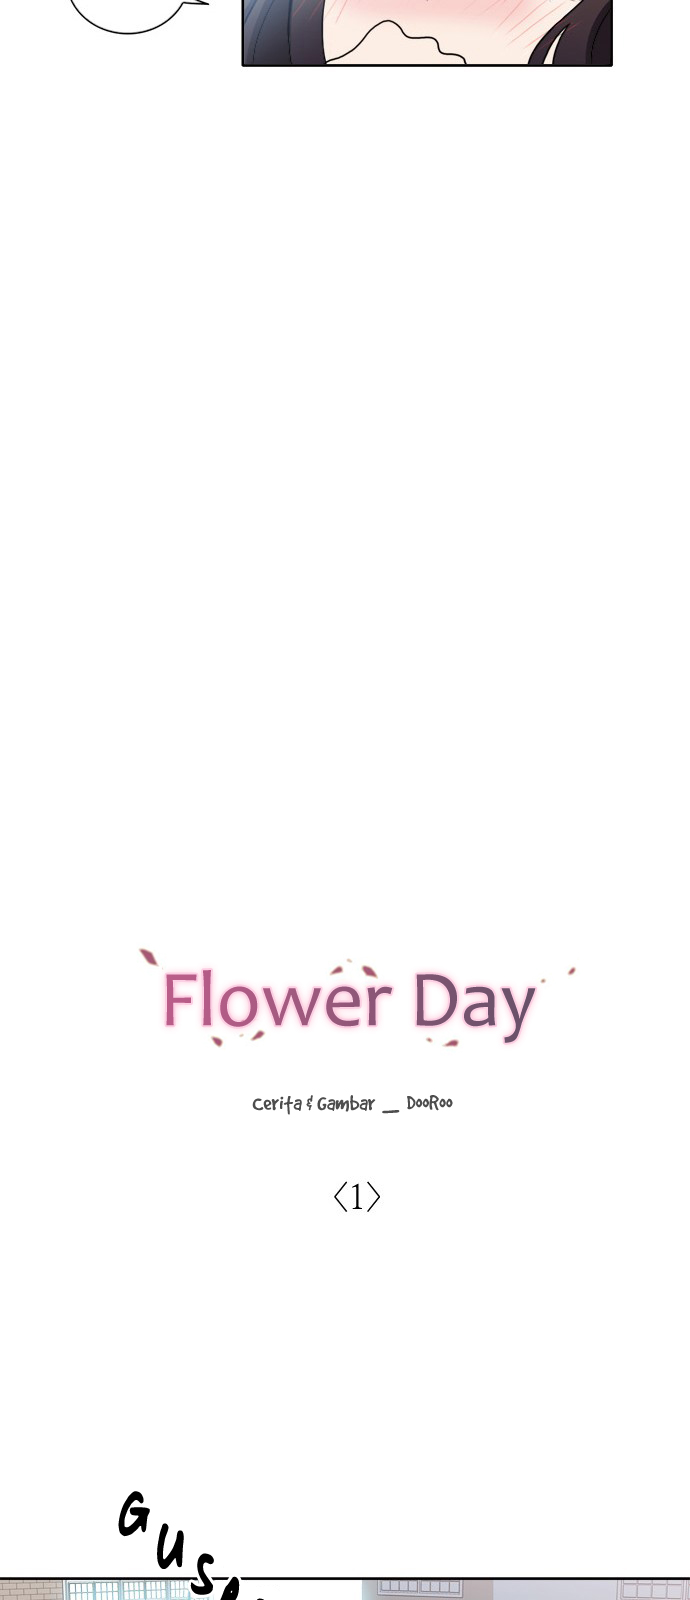 Flower Day Chapter 01